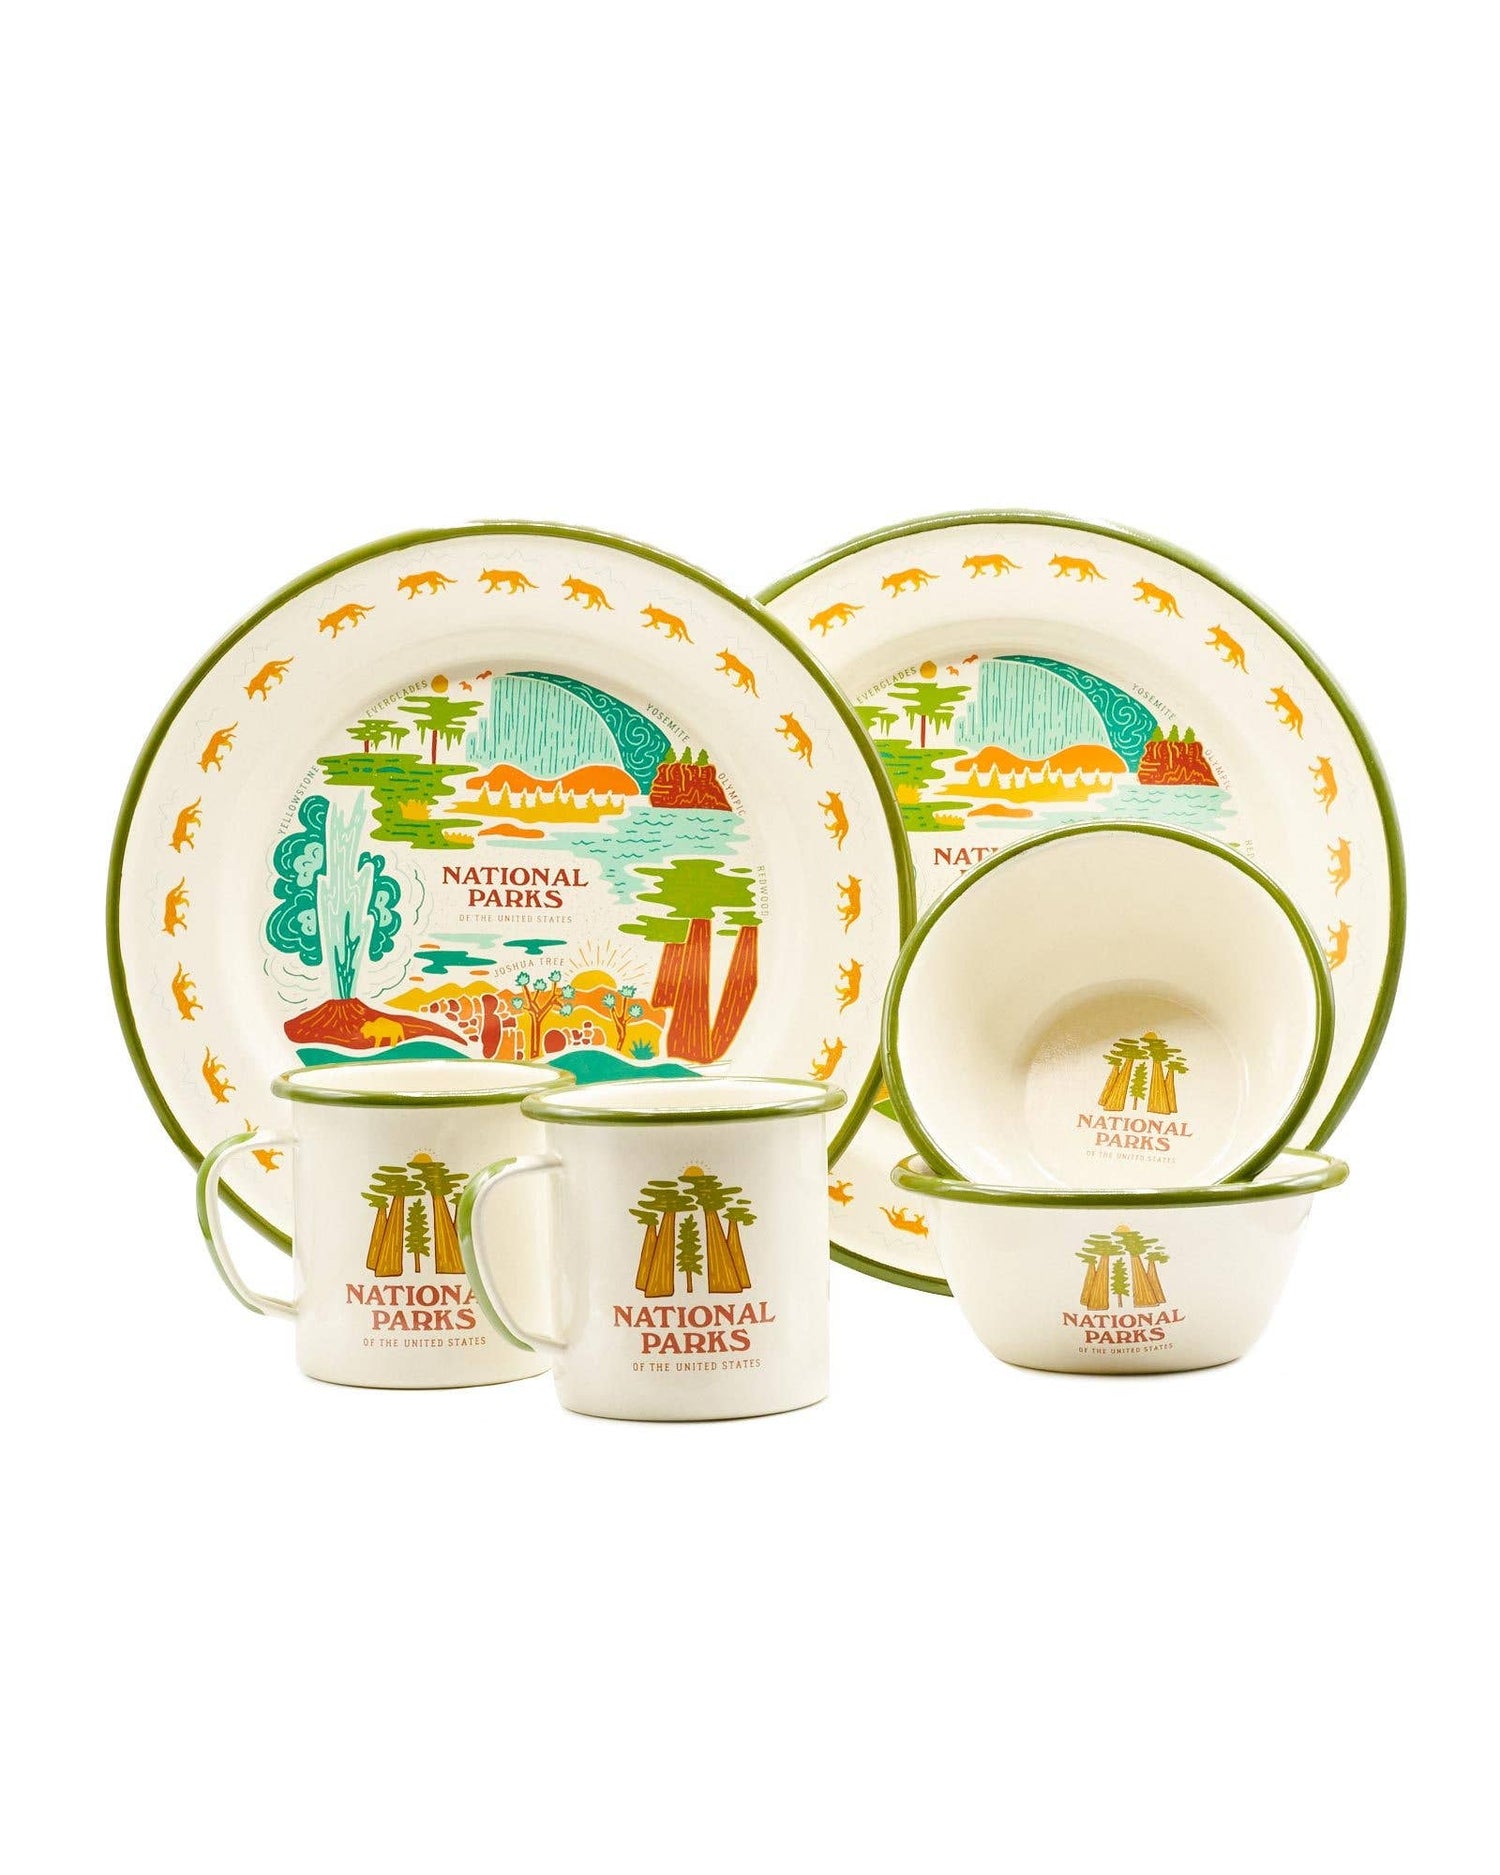 National Parks enamelware dish set with two plates, two mugs and two bowls by Parks Project